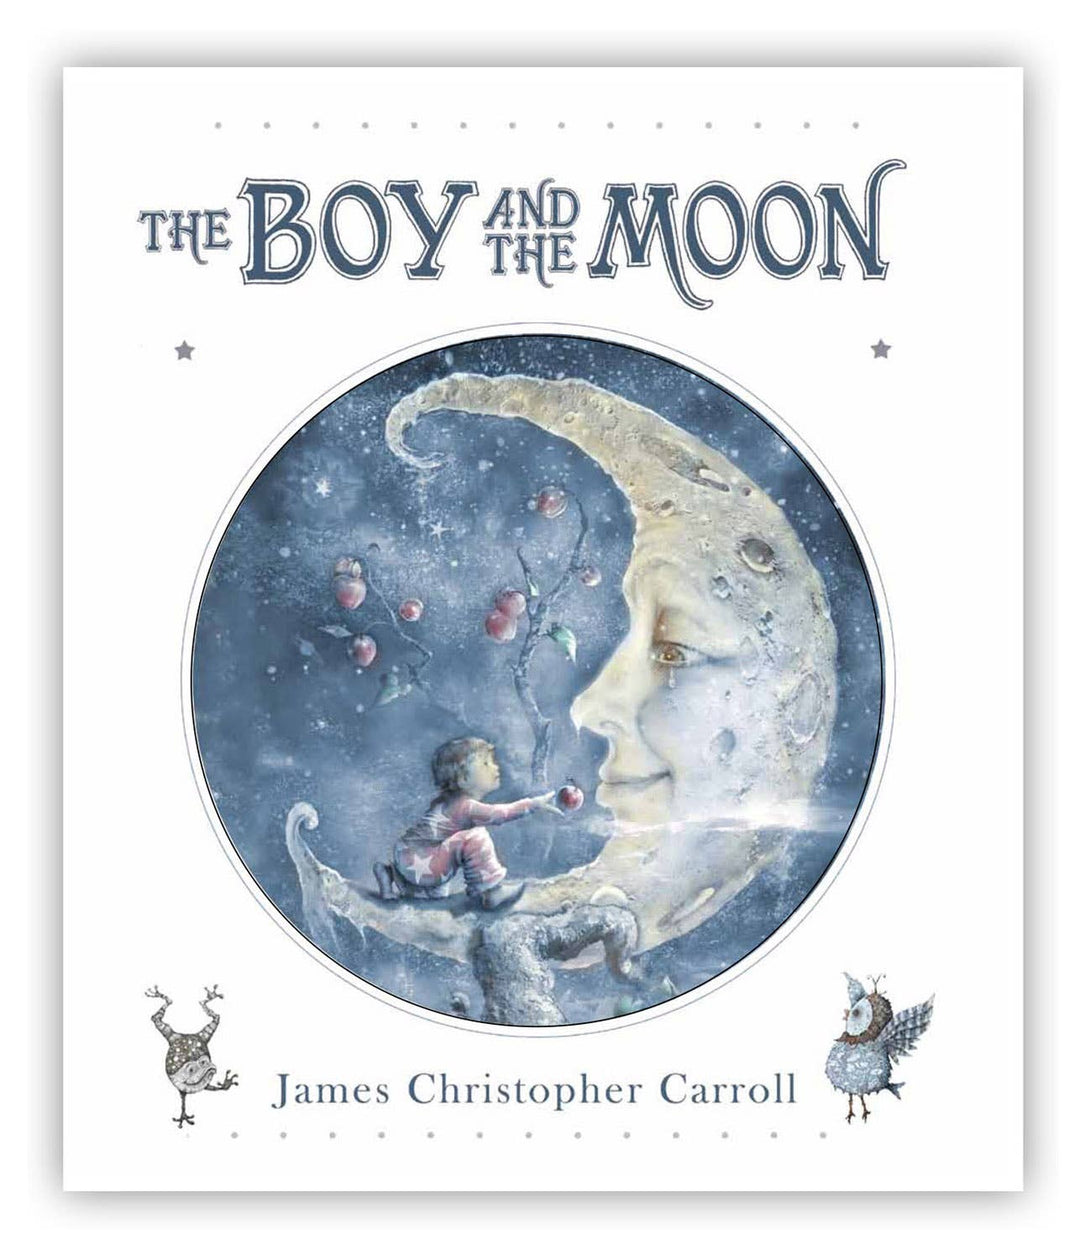 The Boy and The Moon